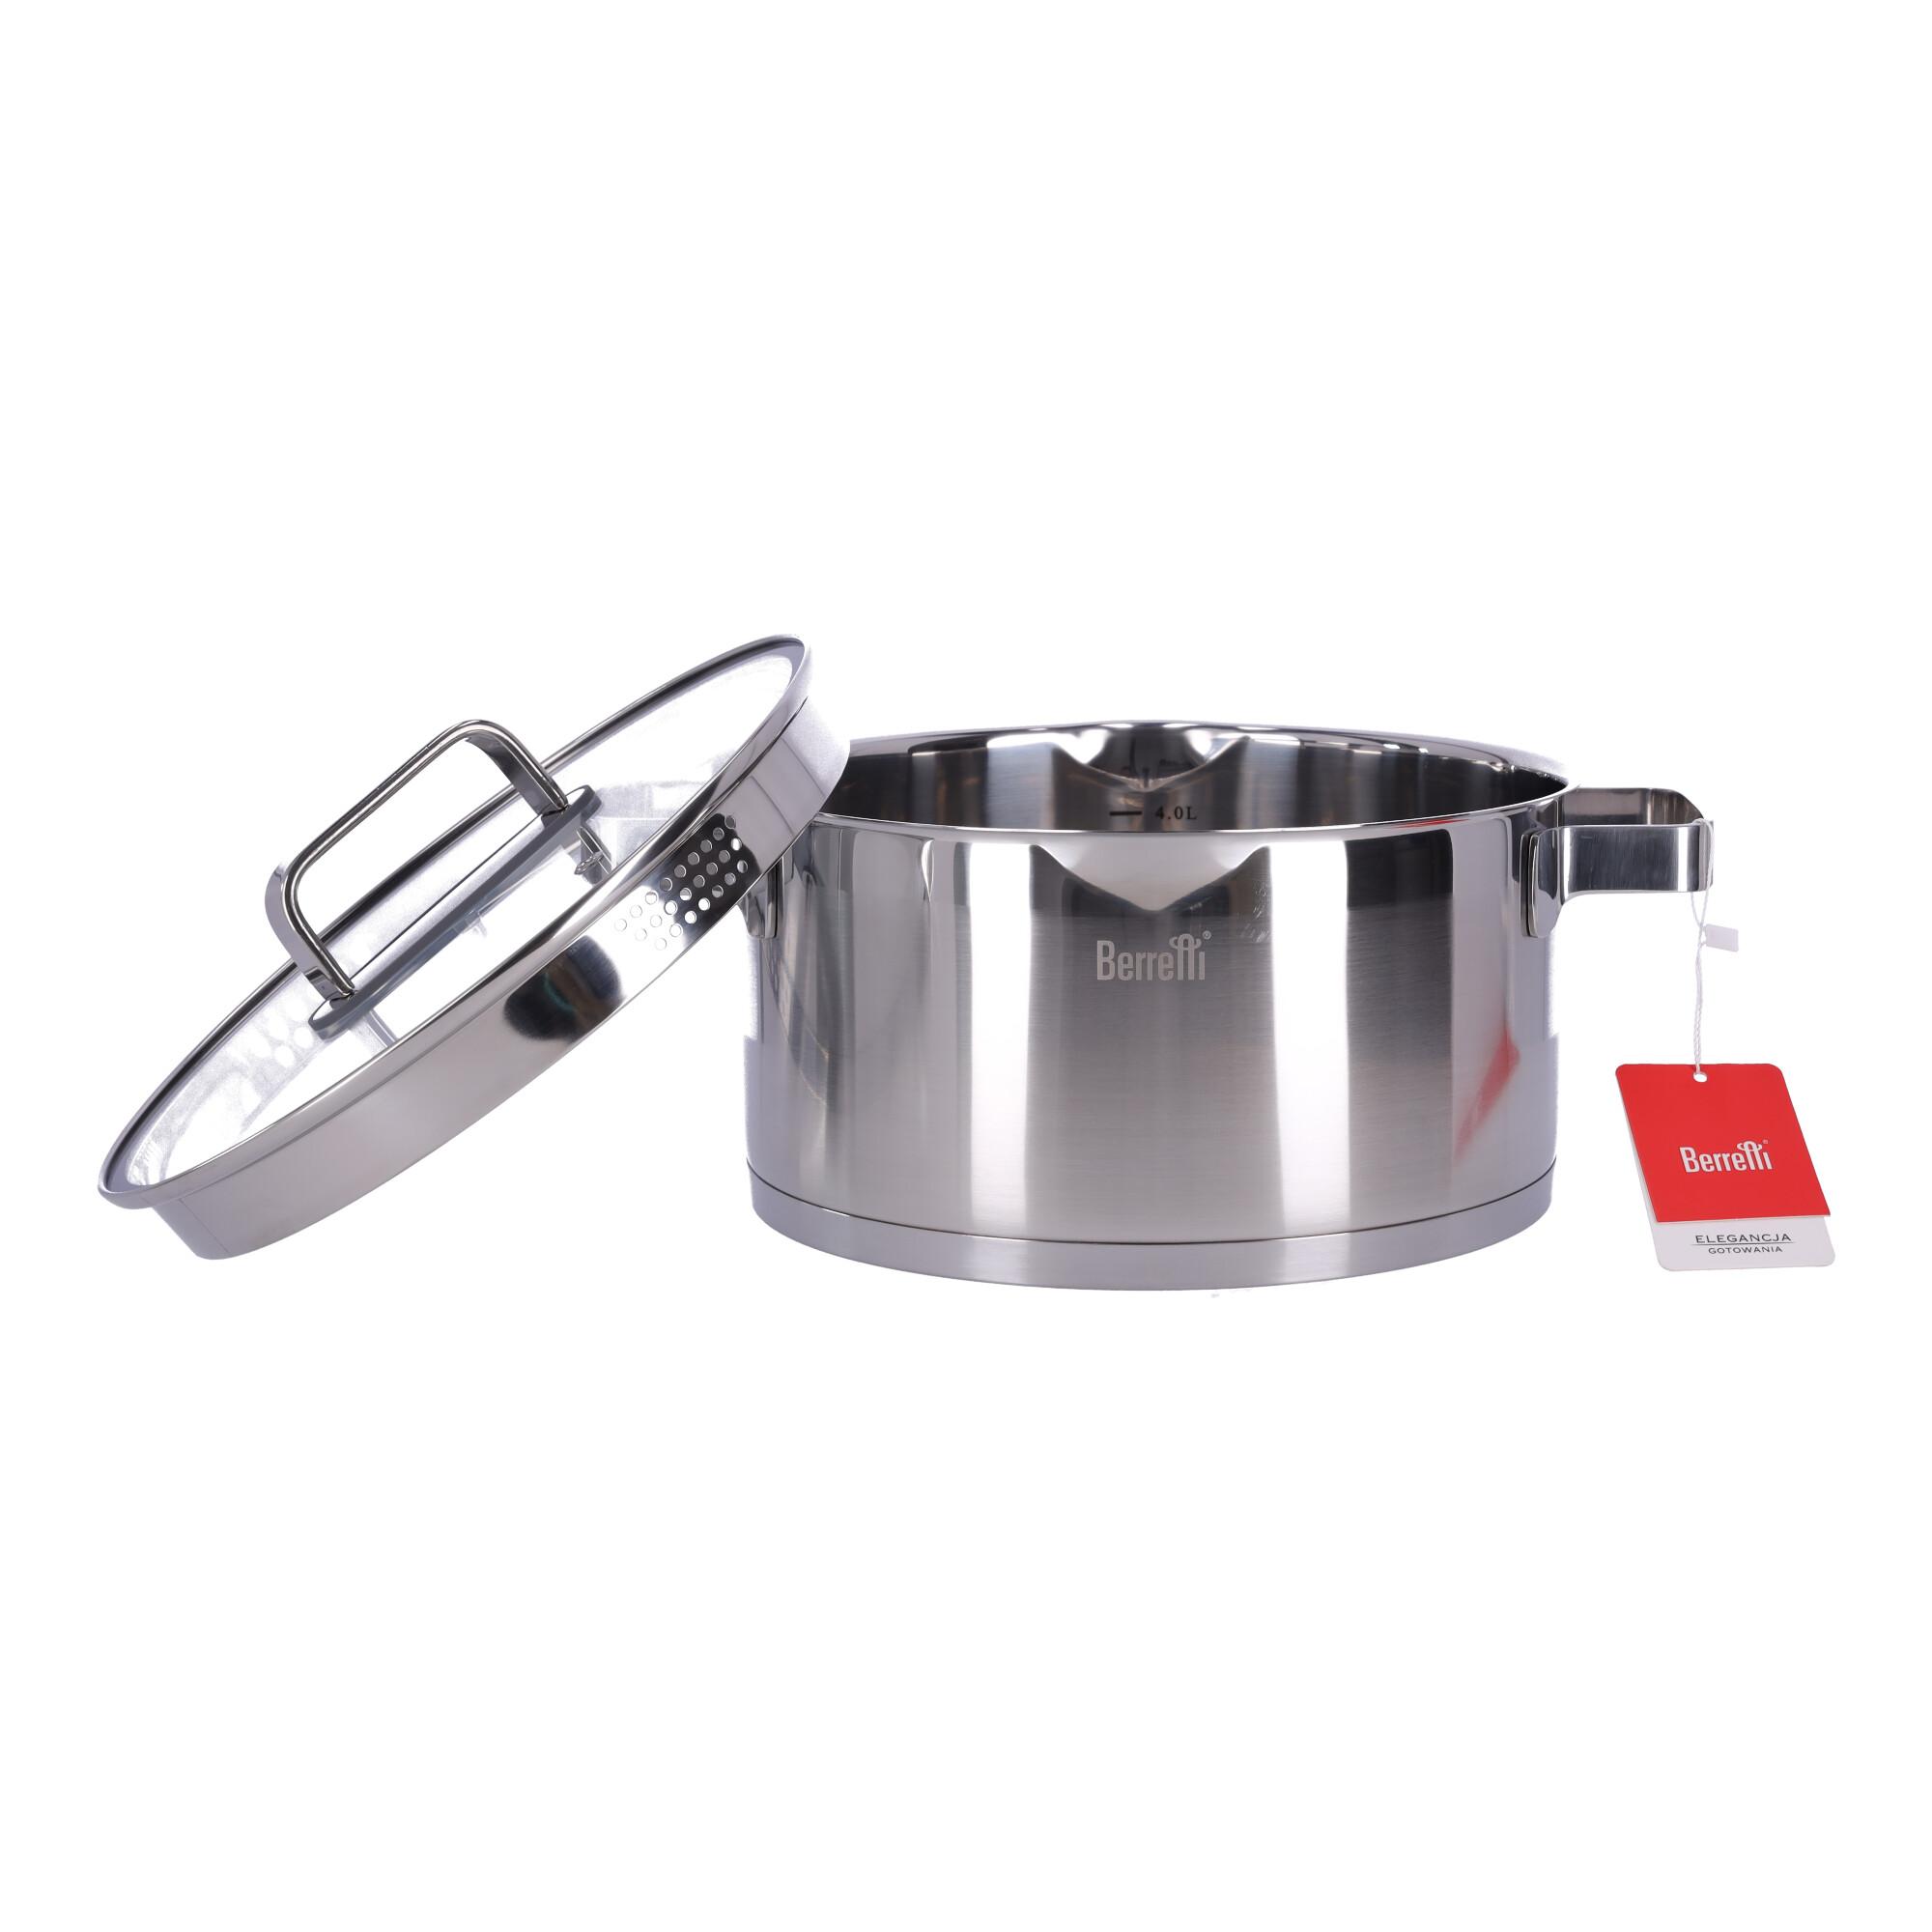 Stainless steel pot with lid Mistral BERRETTI, 24 cm